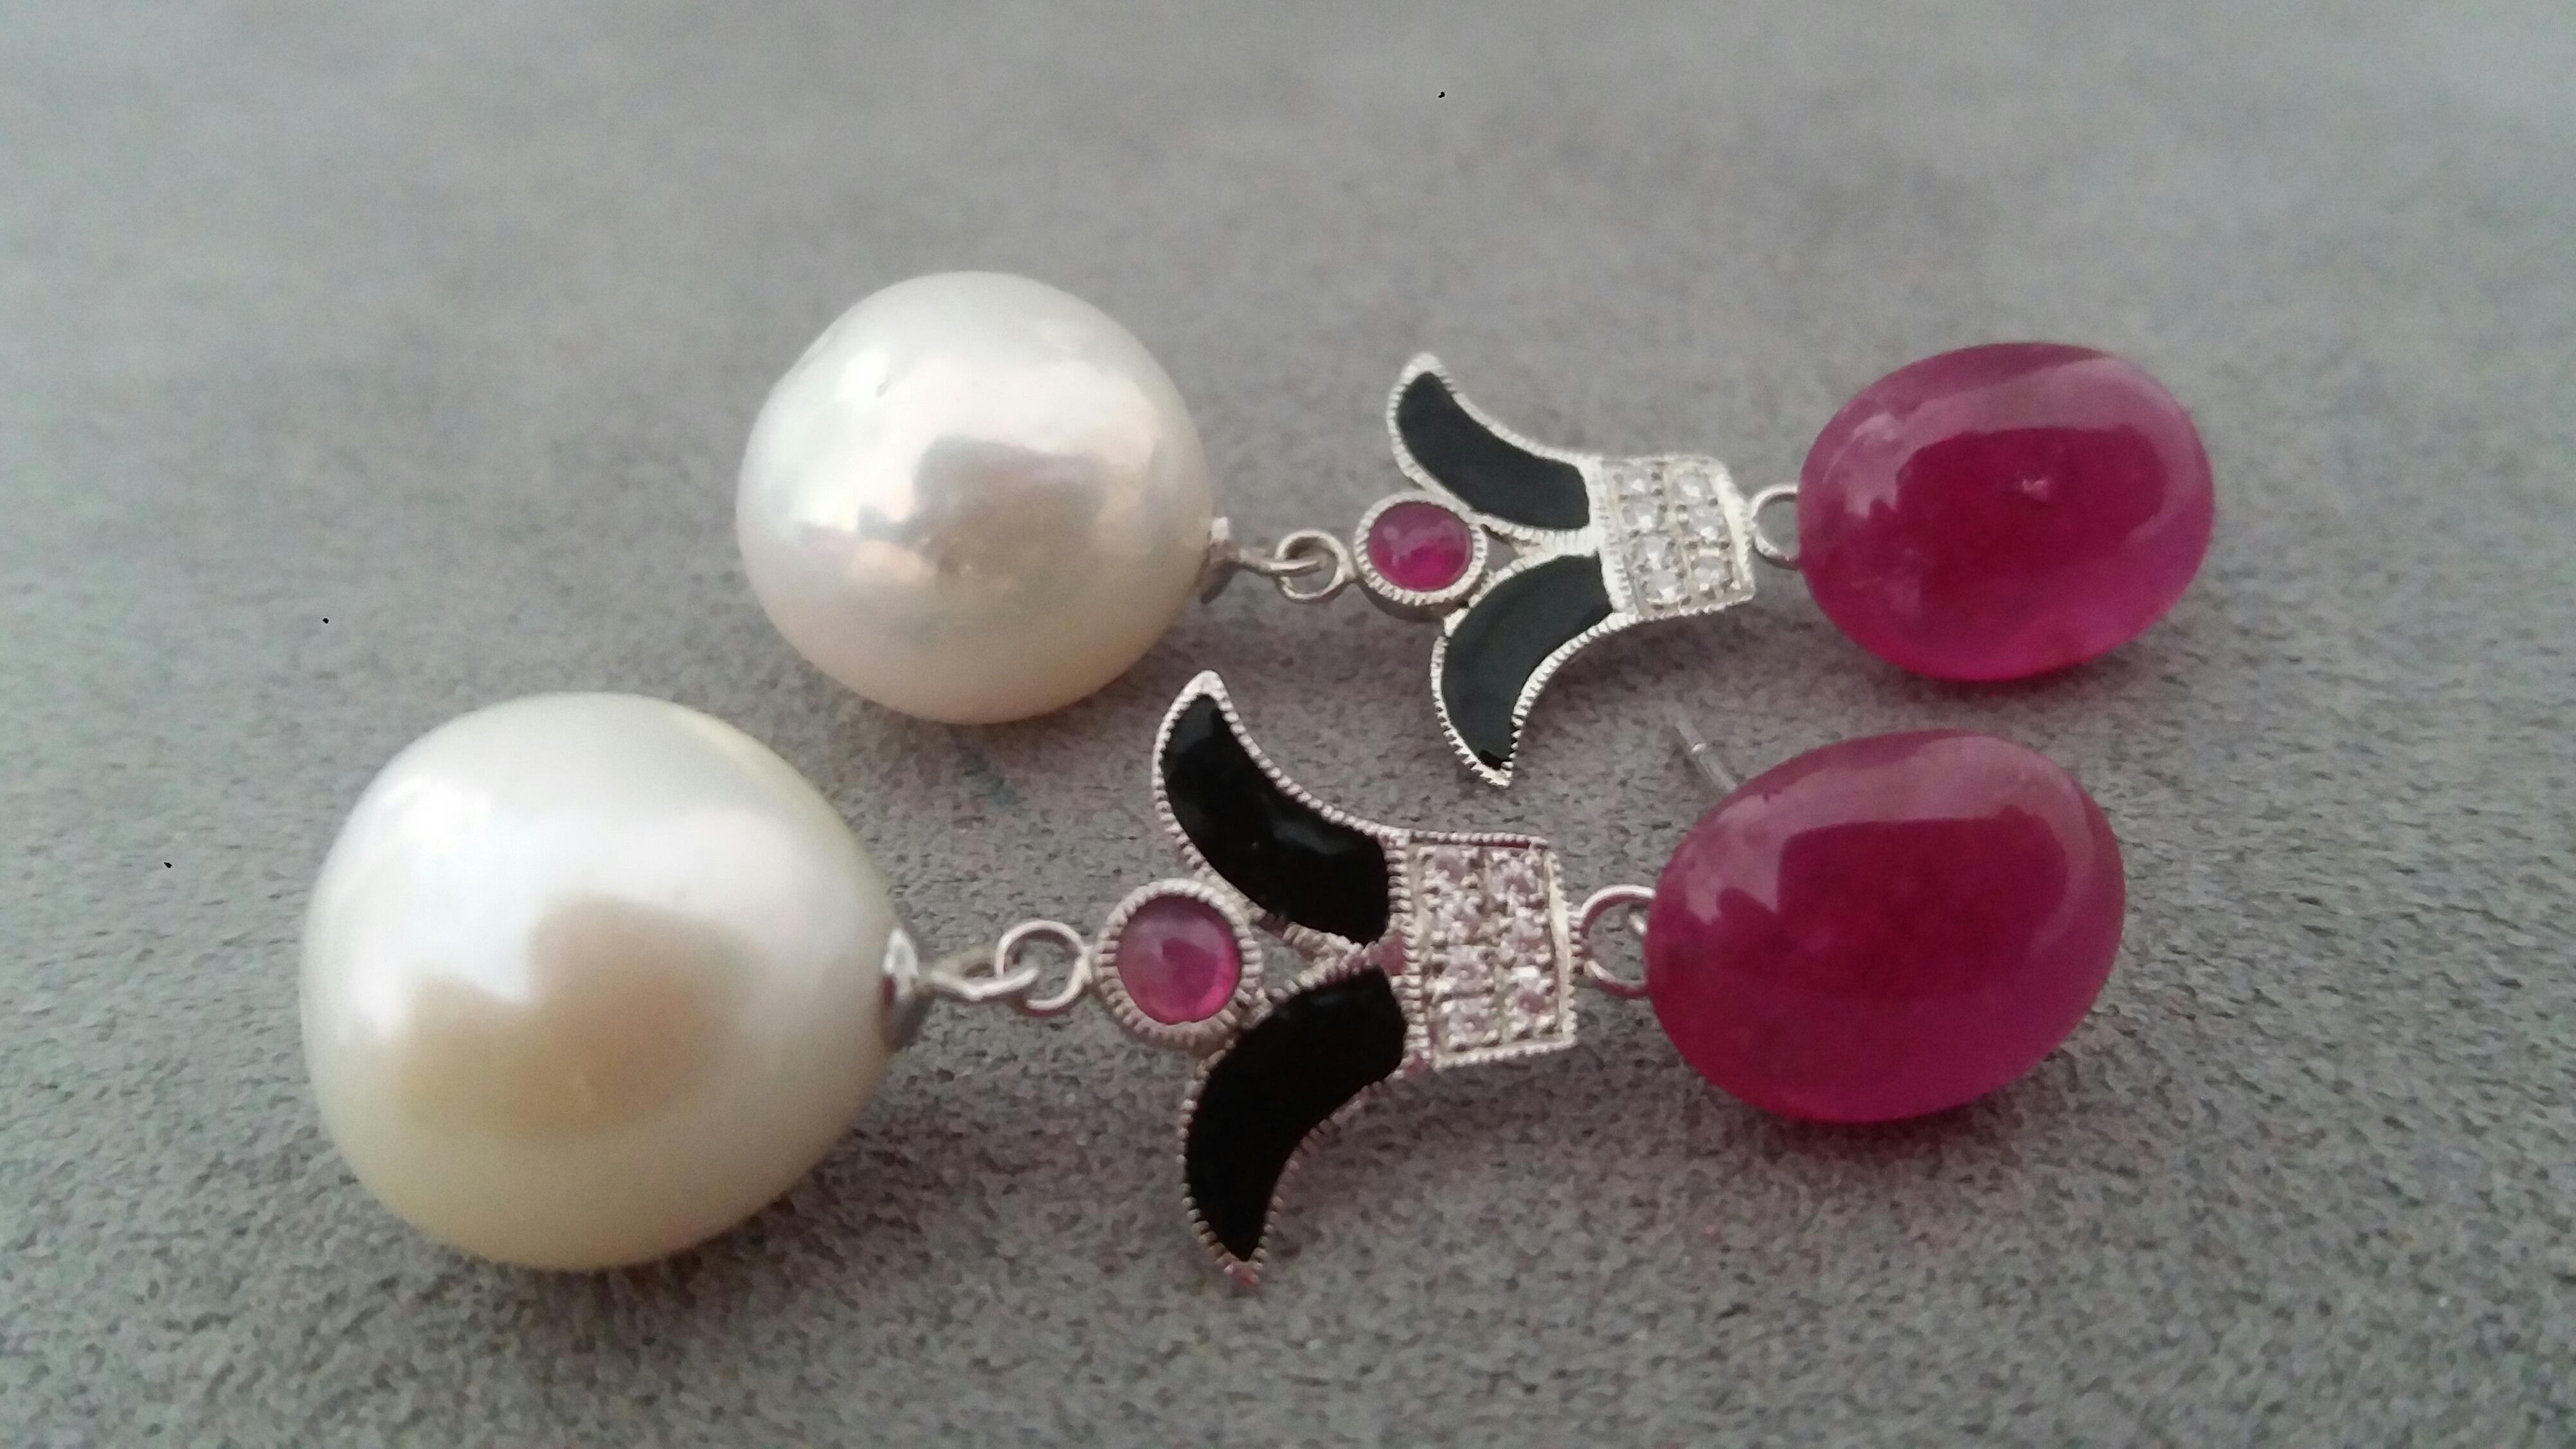 Cabochon Art Deco Style White Baroque Pearls Ruby Cab Black Enamel Gold Diamonds Earrings For Sale